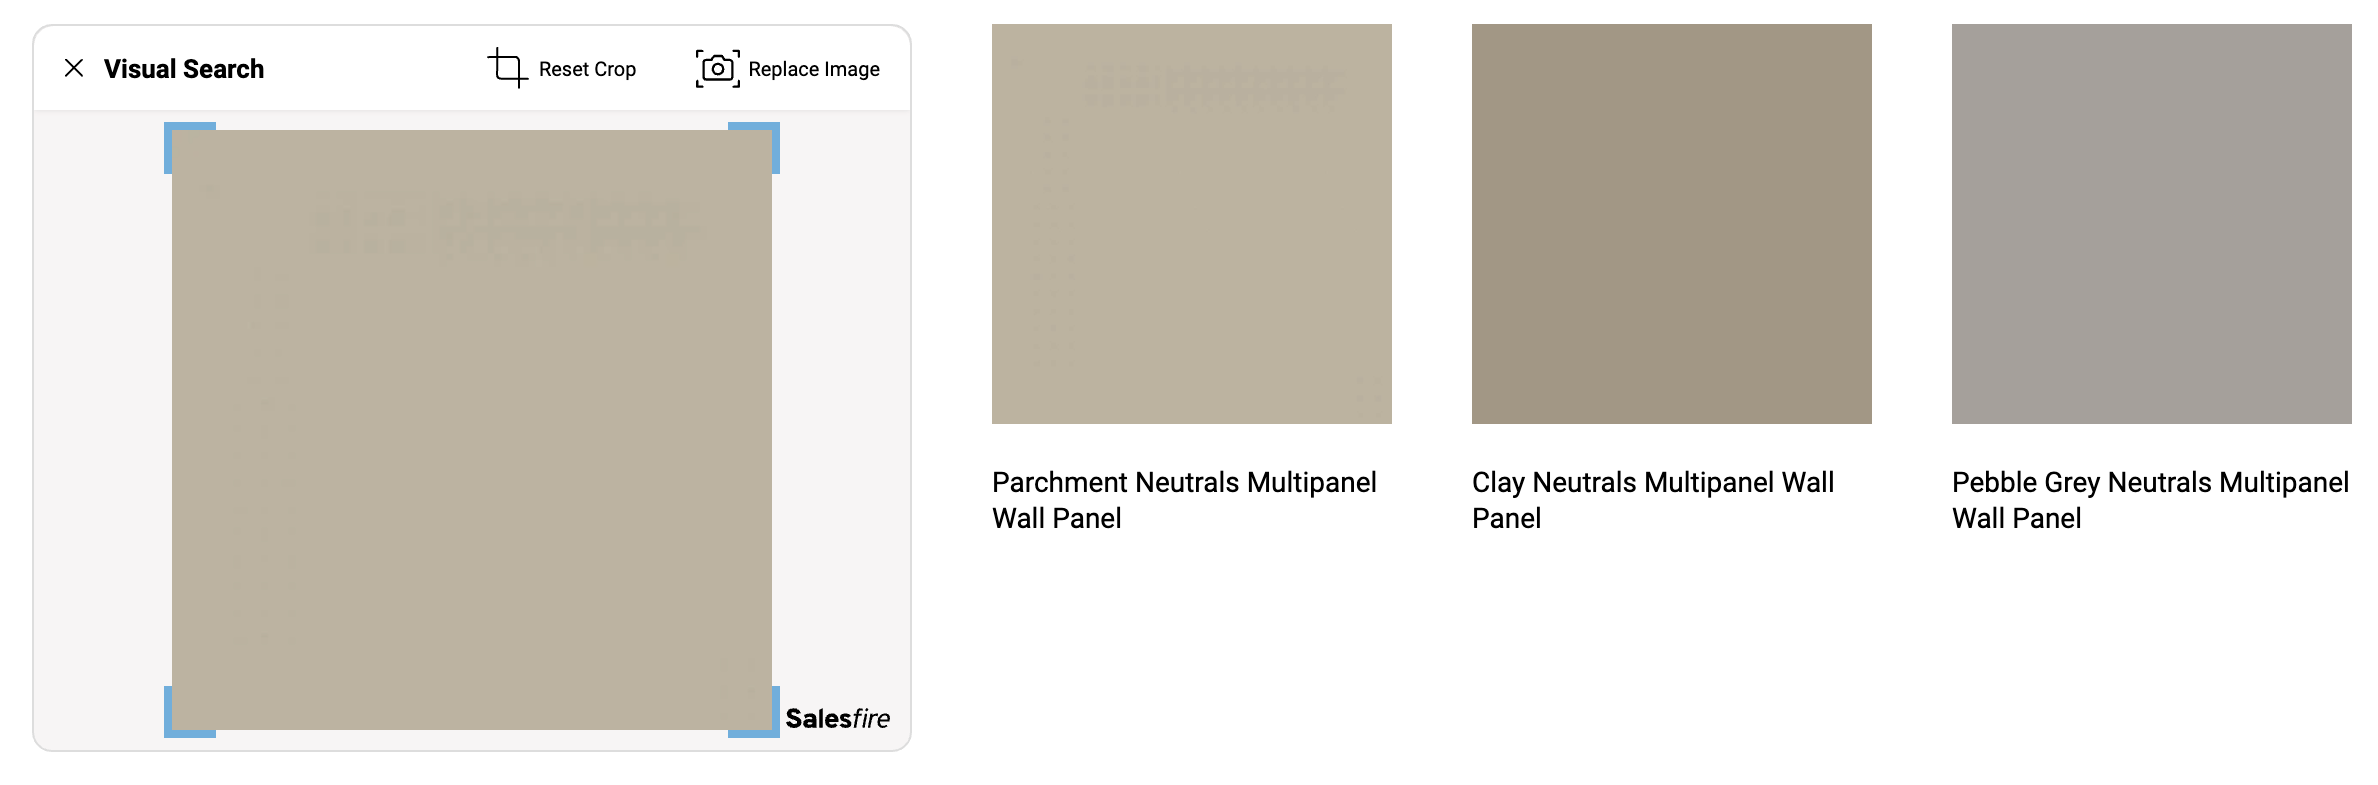 Parchment Neutrals Multipanel Wall Panel